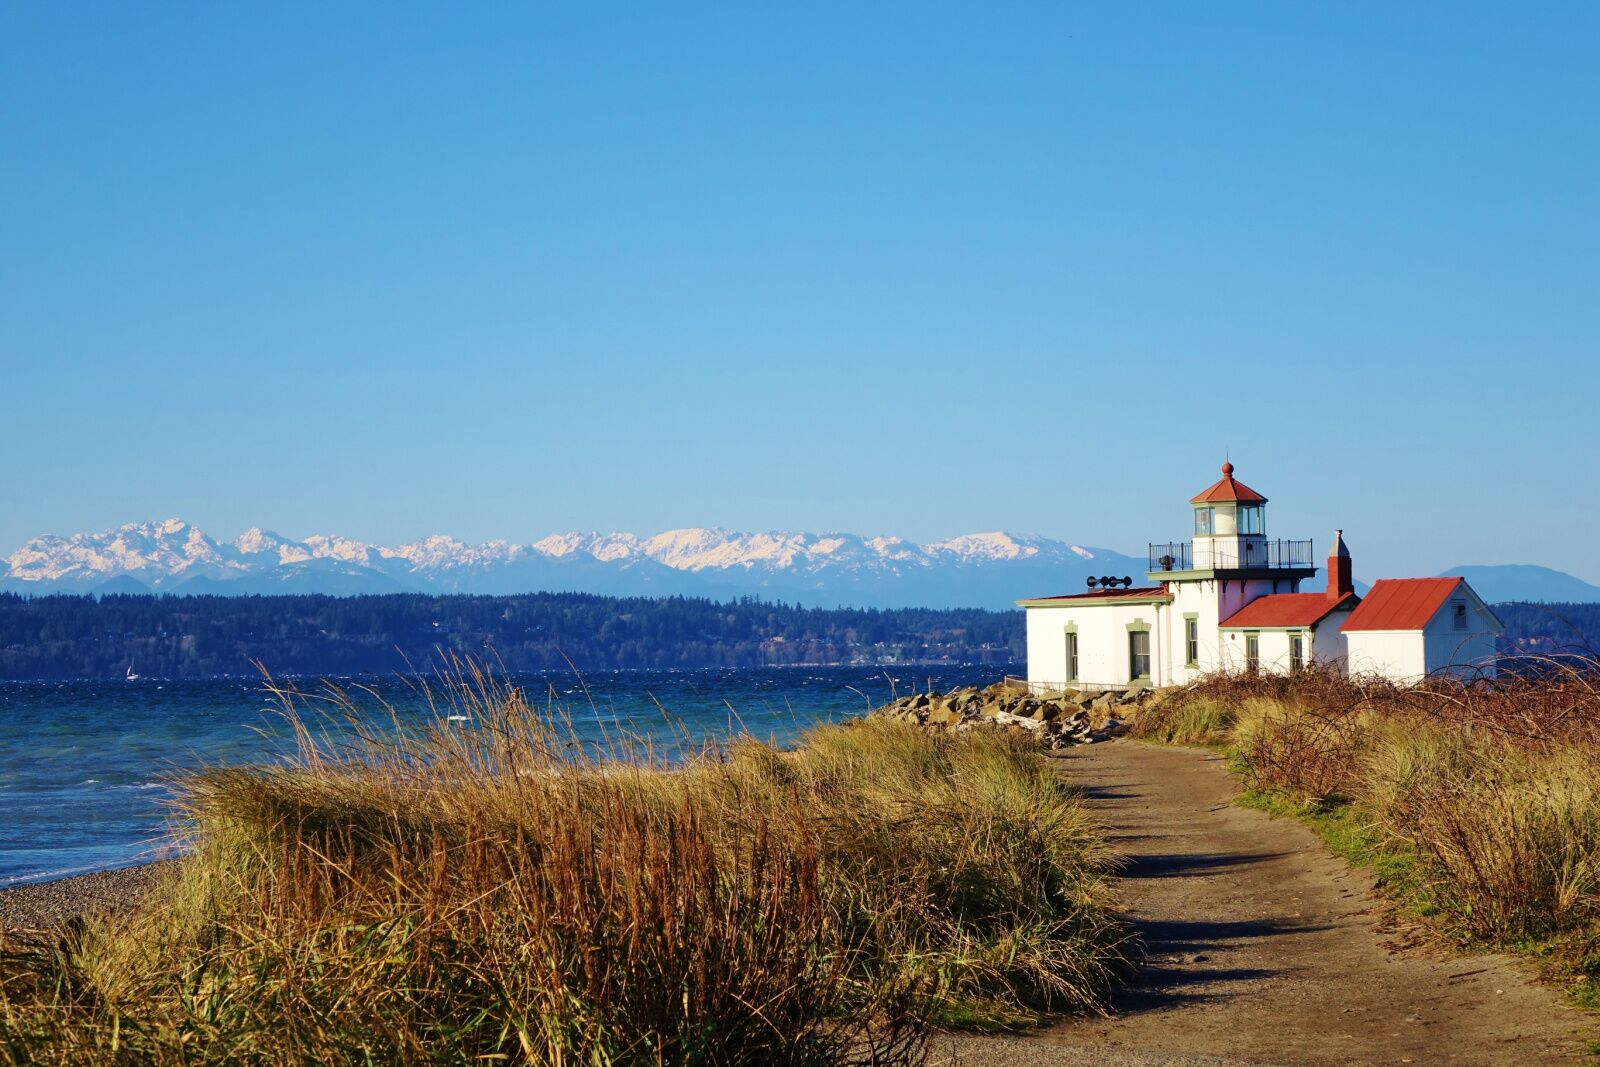 Parks in seattle - discovery park lighthouse